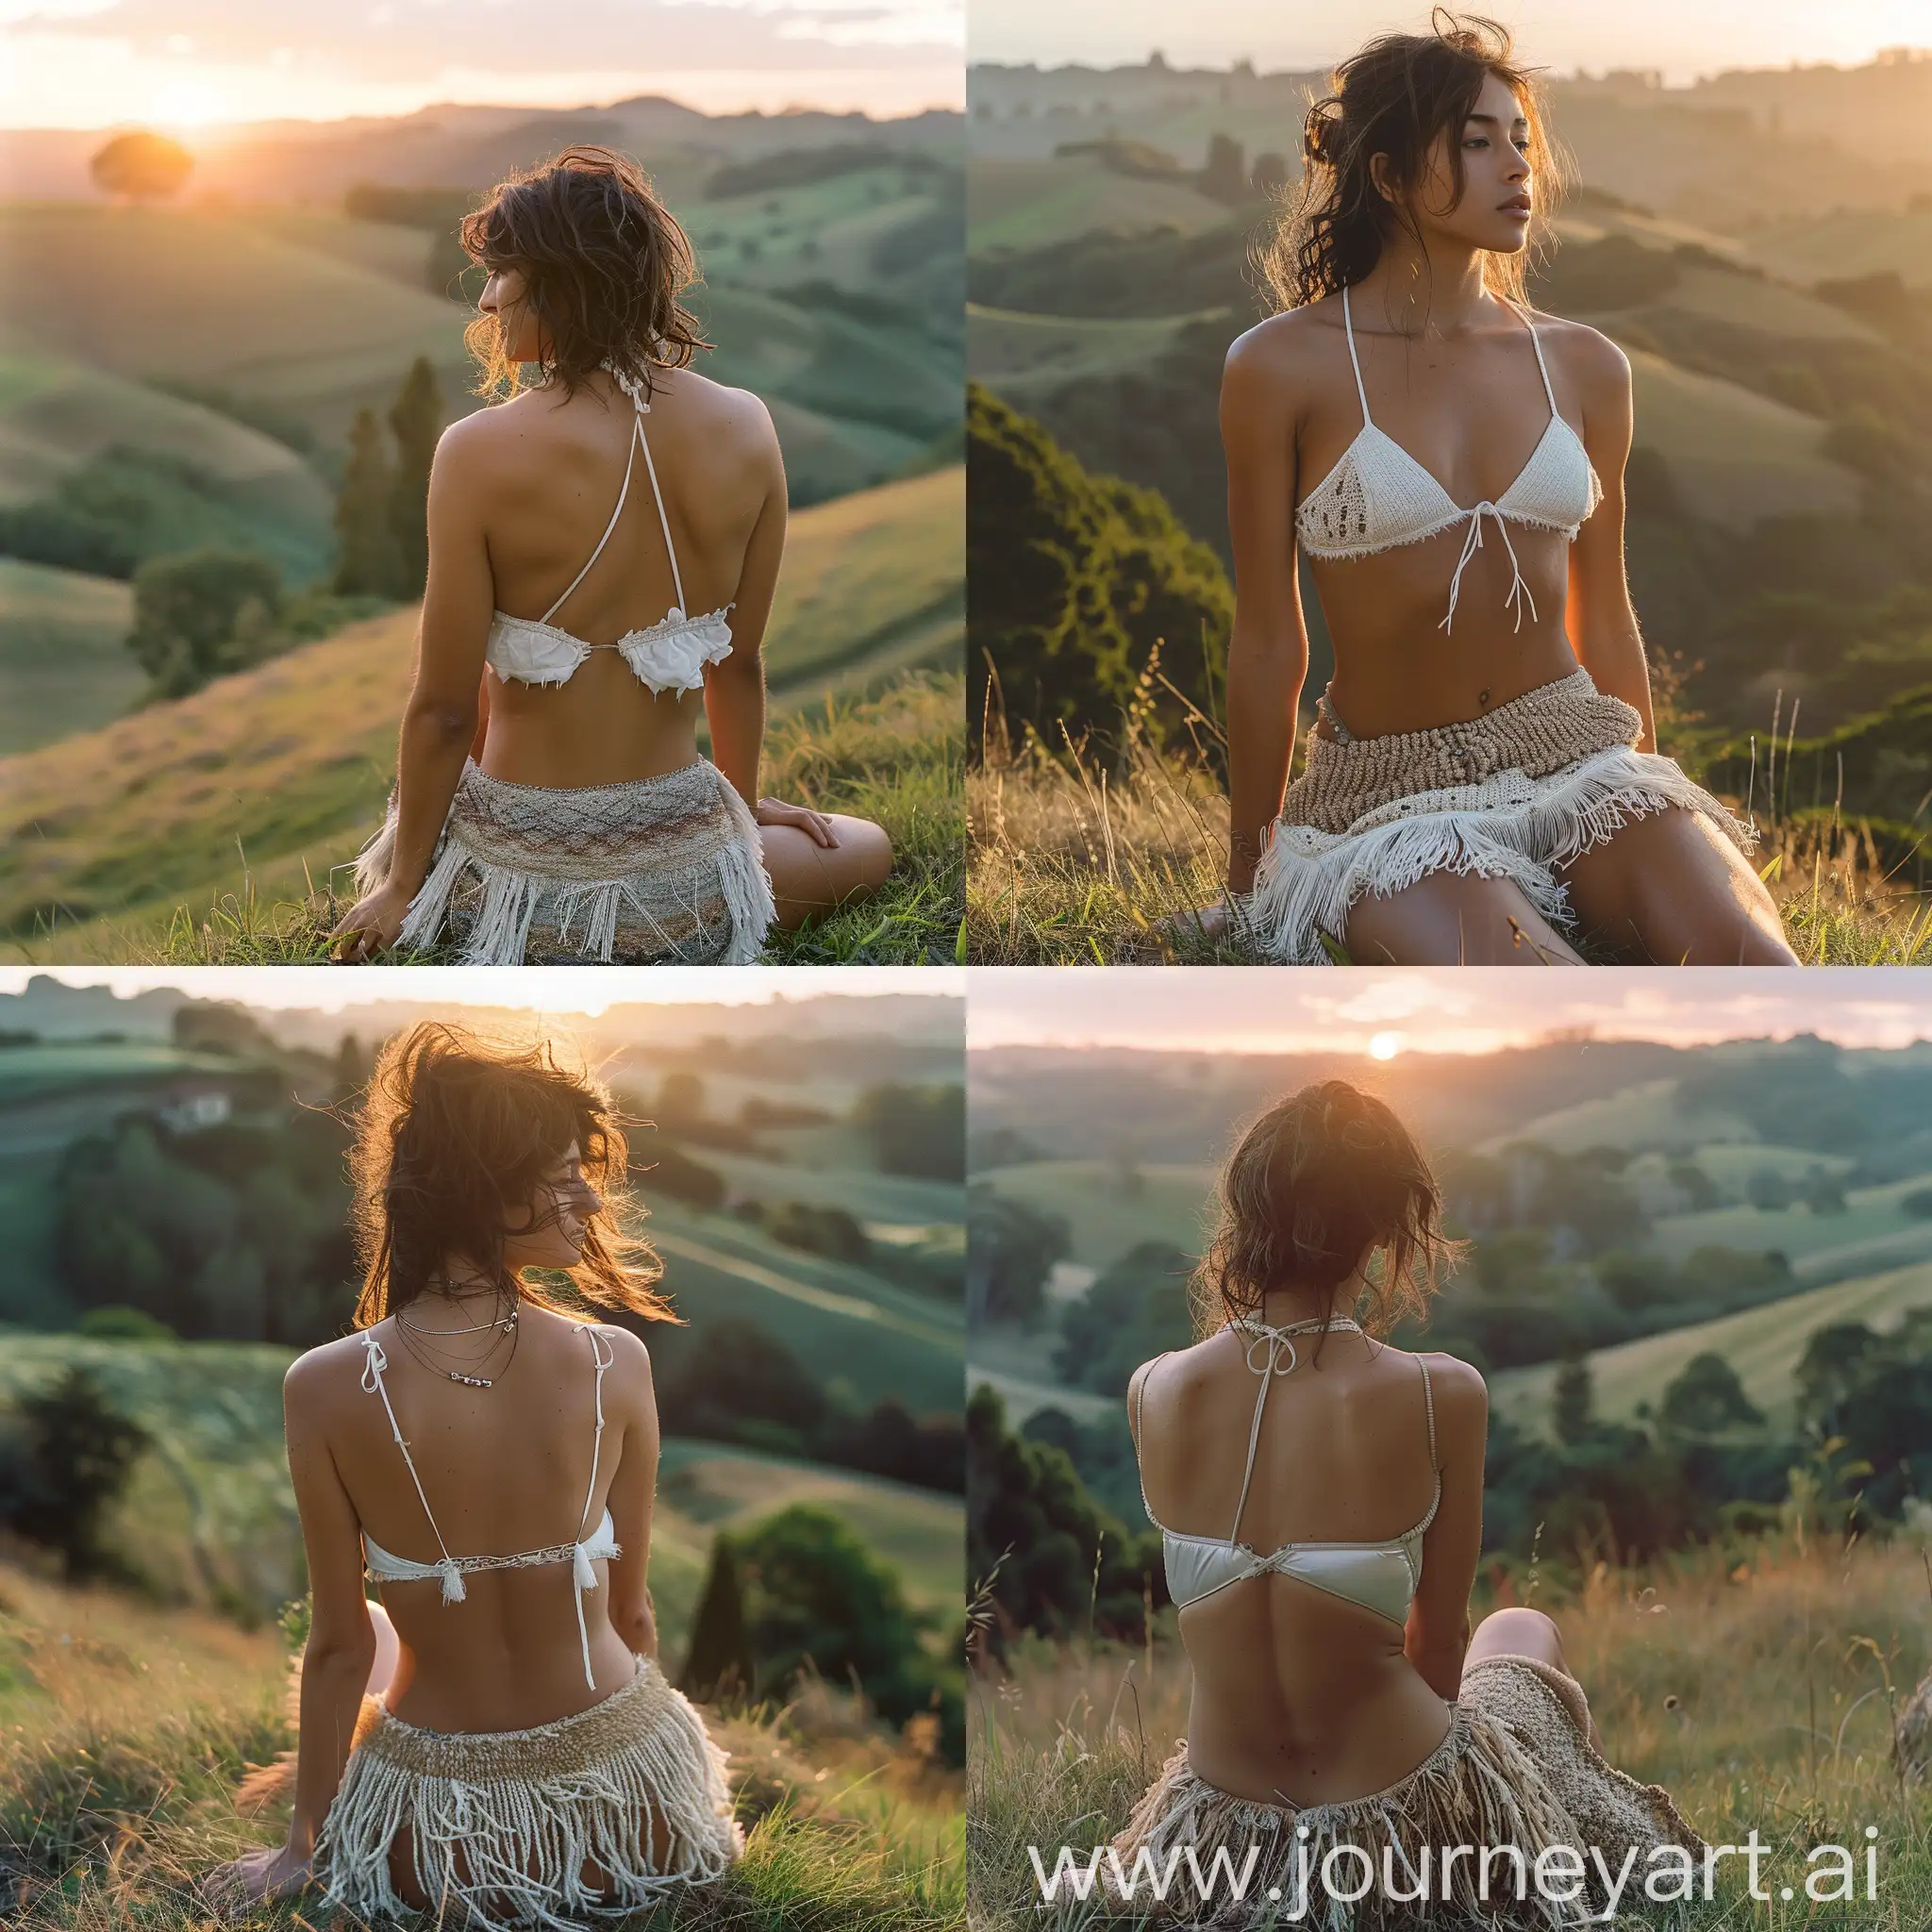  a person in a bohemian outfit against a scenic backdrop during the golden hour. The person is wearing a white bikini top with fringes and a textured skirt with fringes, sitting on a grassy hillside. The landscape includes rolling hills, trees, and warm colors, creating a serene and peaceful atmosphere --style raw --stylize 750. 